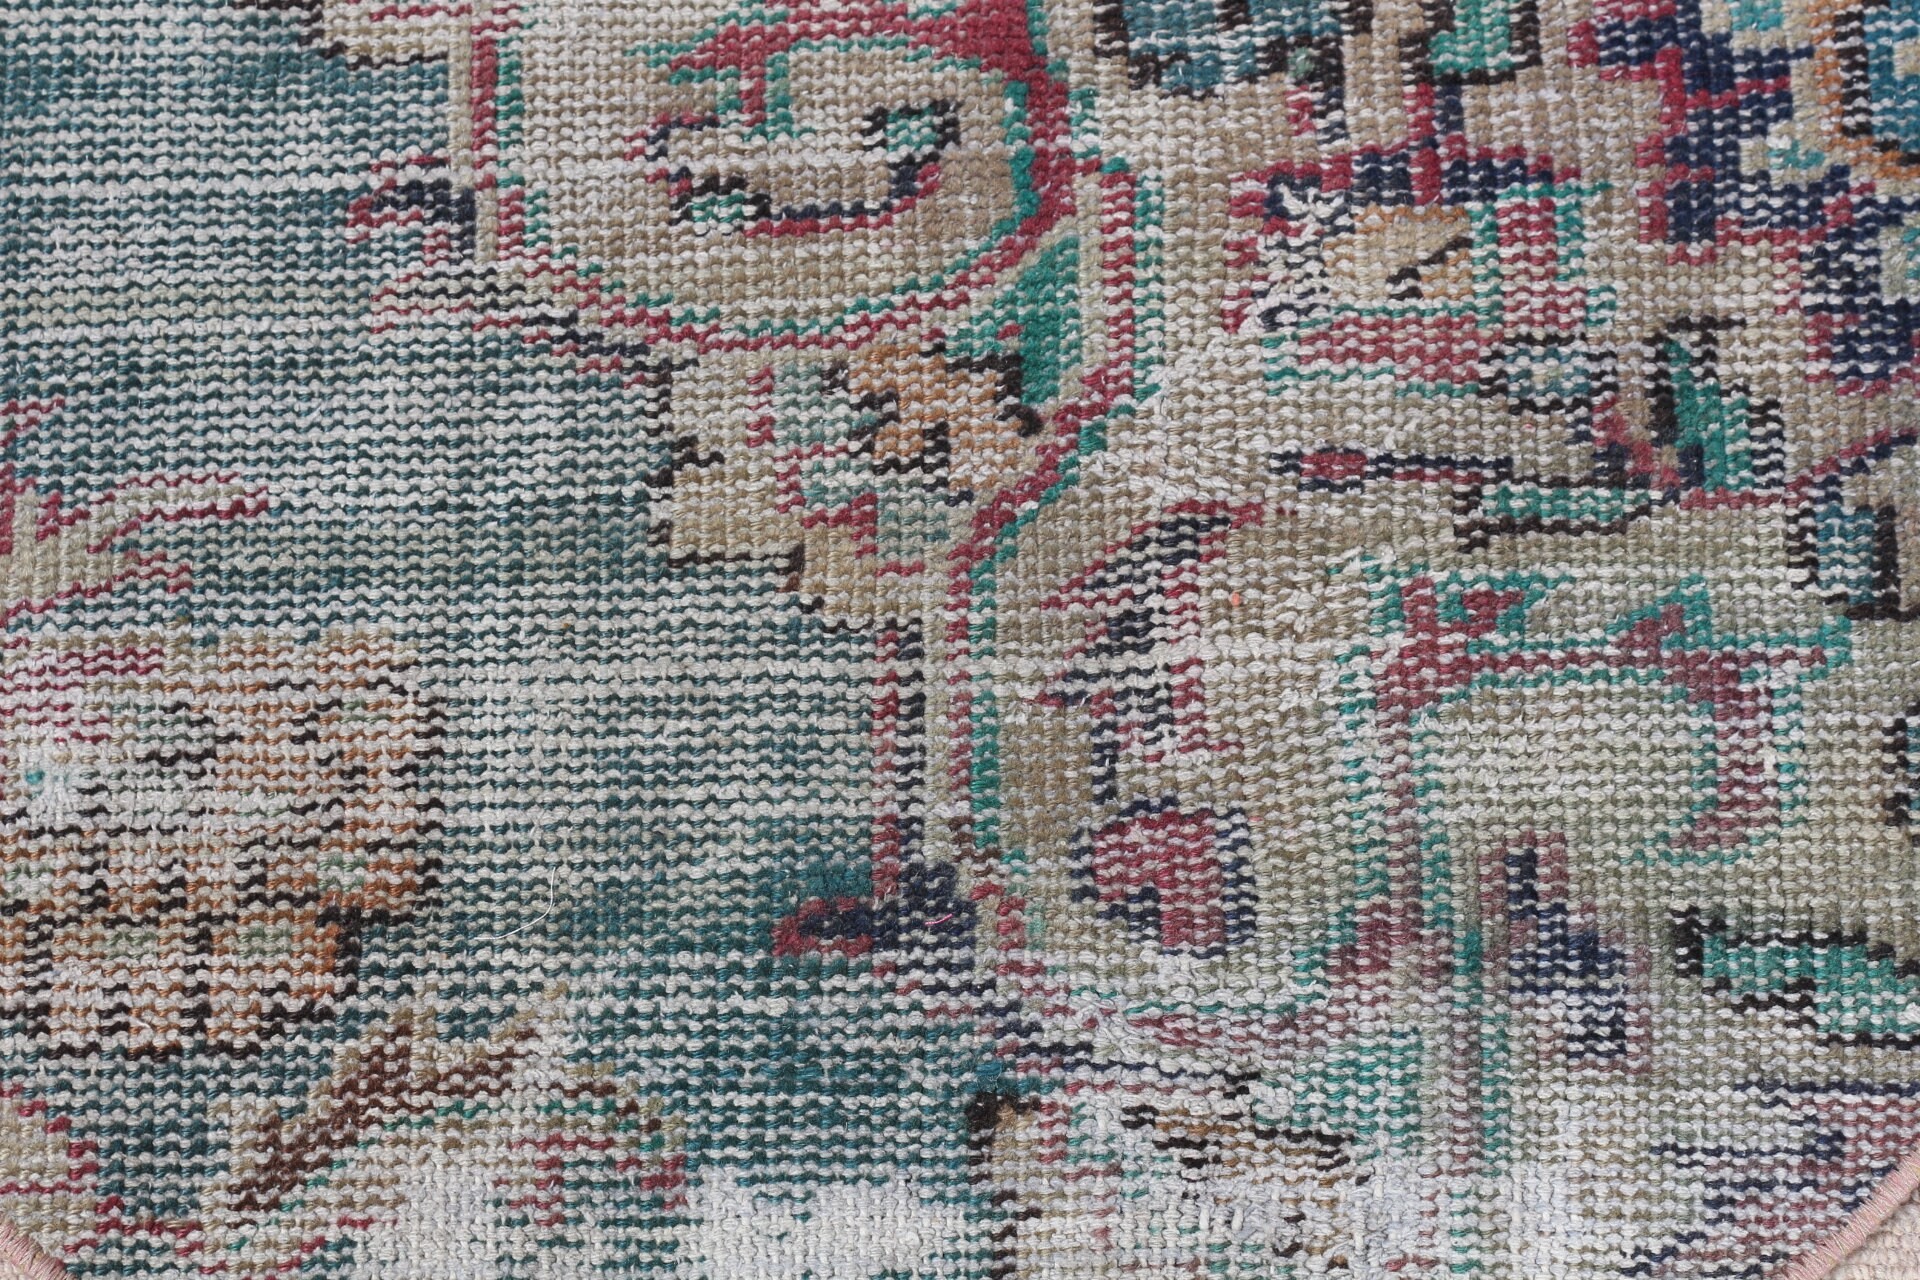 Bathroom Rug, Anatolian Rugs, Green Wool Rugs, Rugs for Entry, 1.5x2.5 ft Small Rug, Turkish Rugs, Vintage Rug, Moroccan Rugs, Kitchen Rug